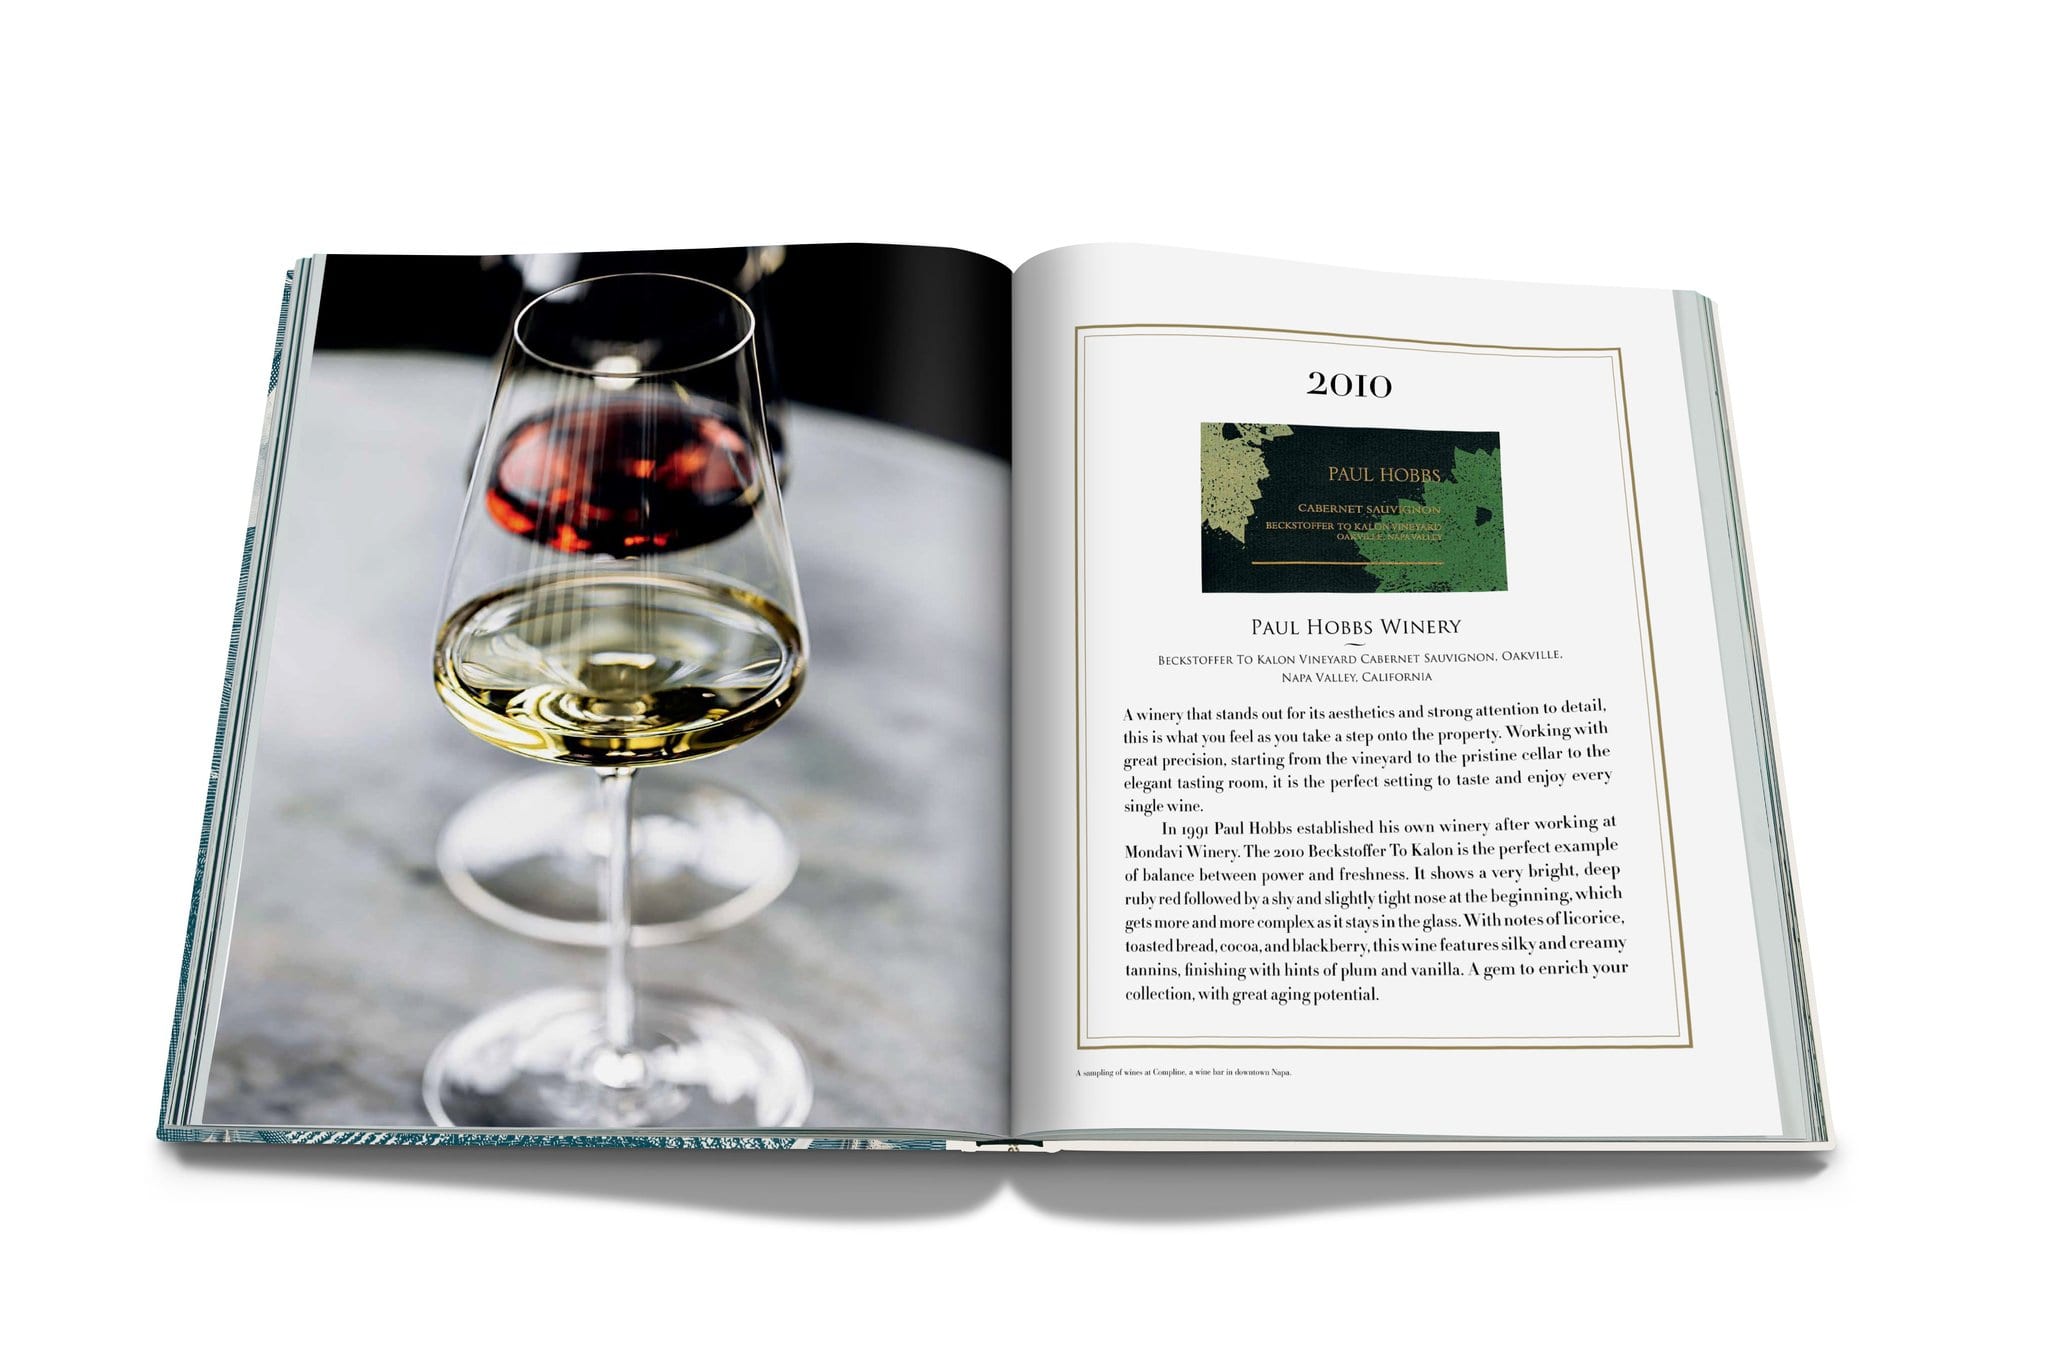 Assouline The Impossible Collection Of American Wine